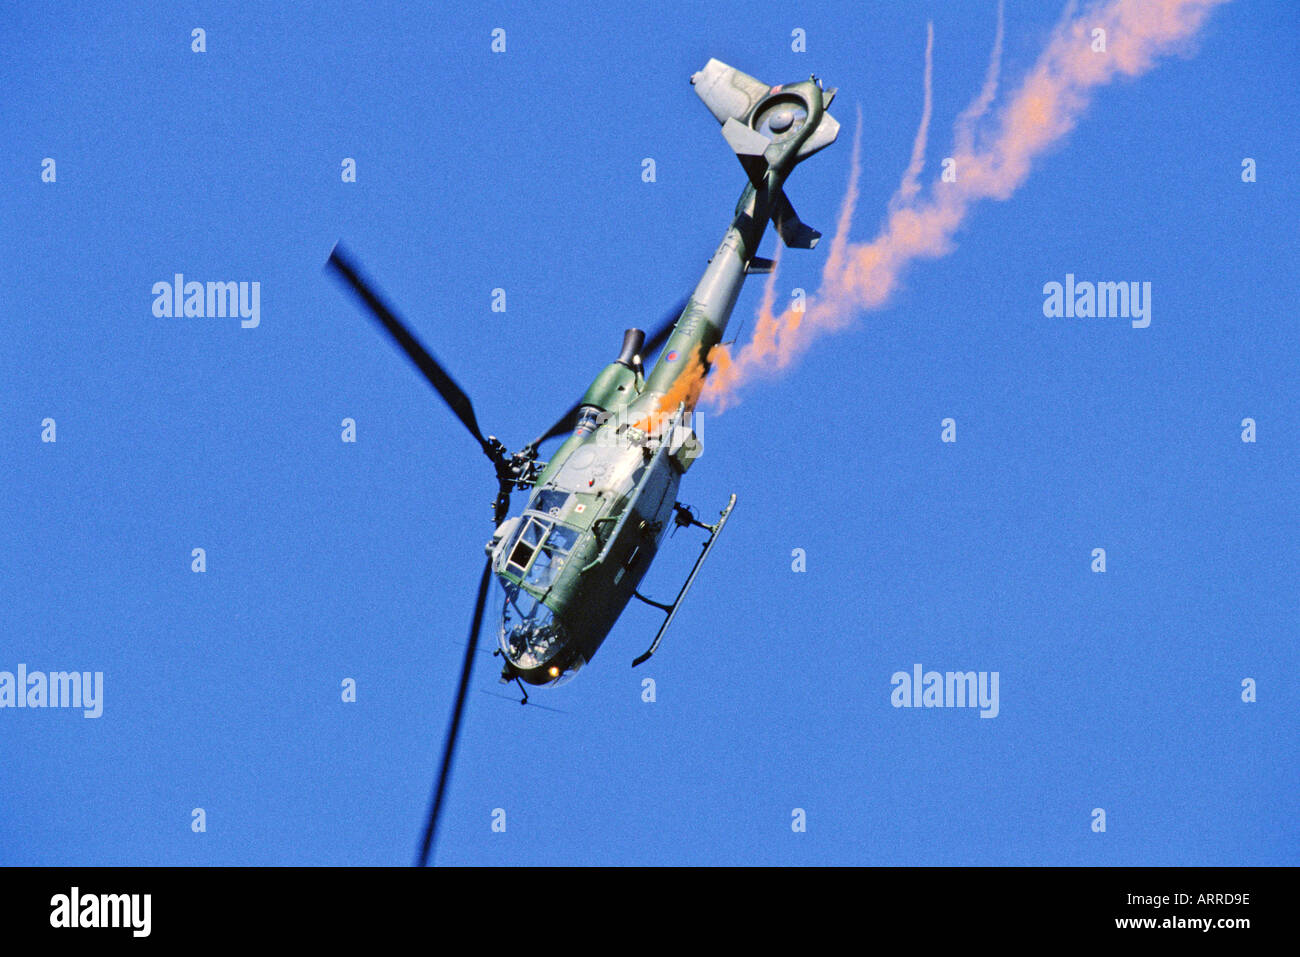 Royal Army Gazelle helicopter Stock Photo